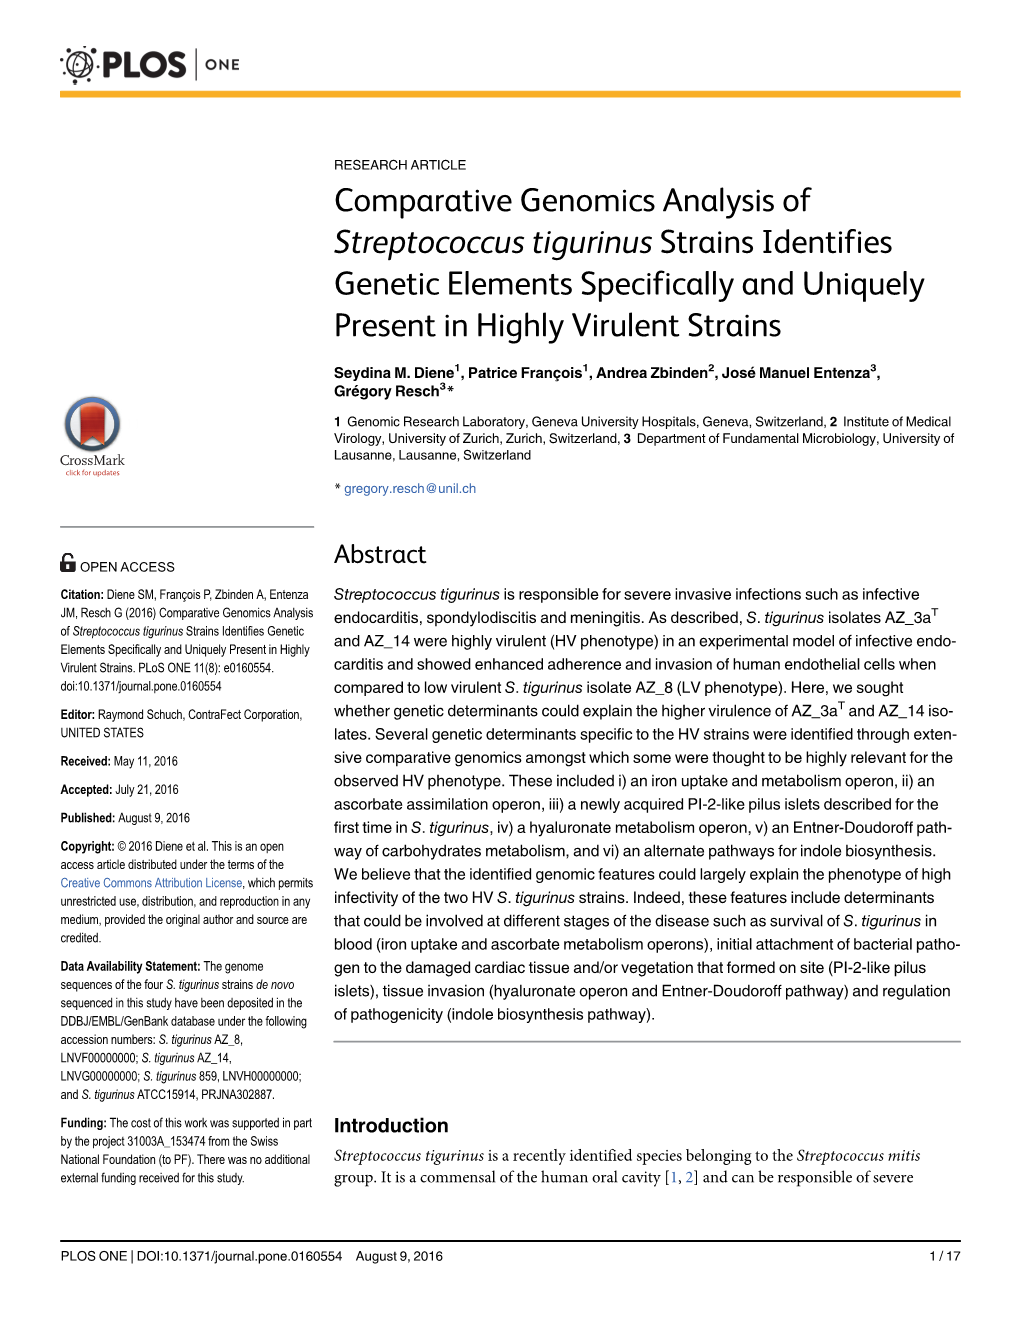 Comparative Genomics Analysis of Streptococcus Tigurinus Strains Identifies Genetic Elements Specifically and Uniquely Present in Highly Virulent Strains